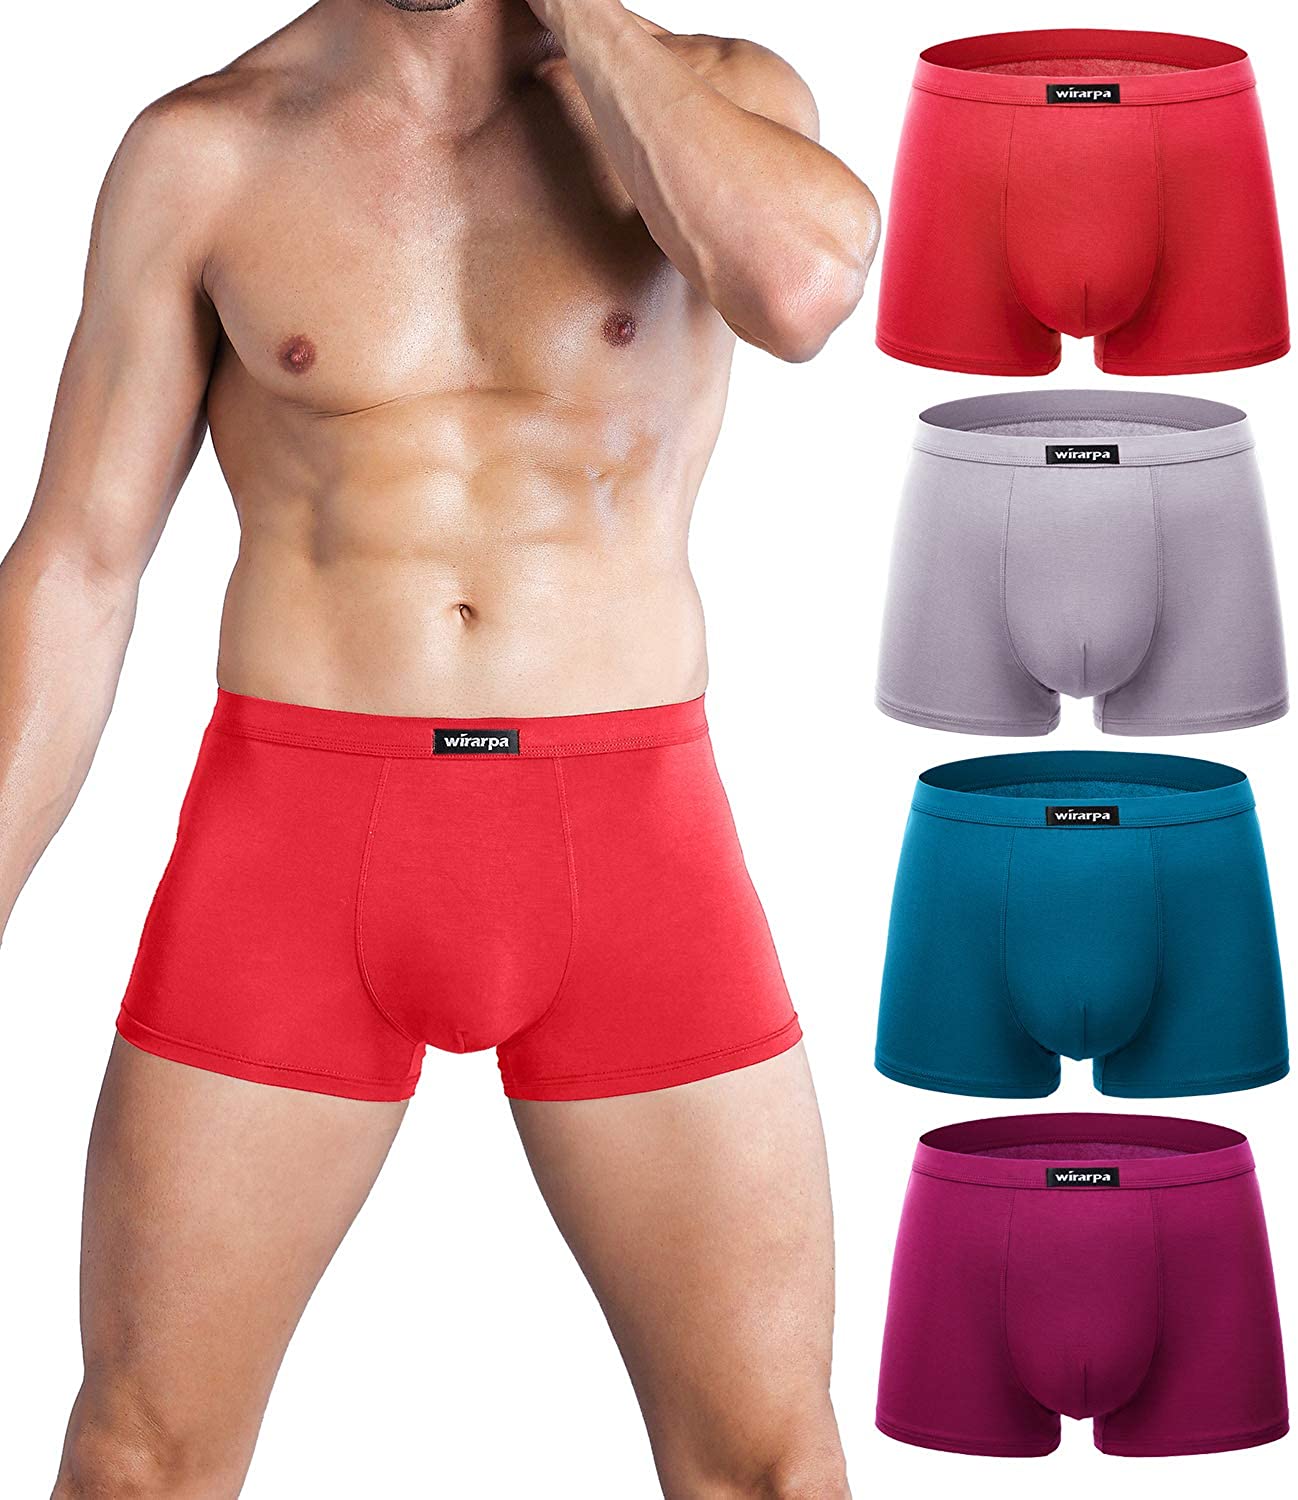 wirarpa Men's Breathable Modal Microfiber Trunks Underwear Covered Band  Multipac